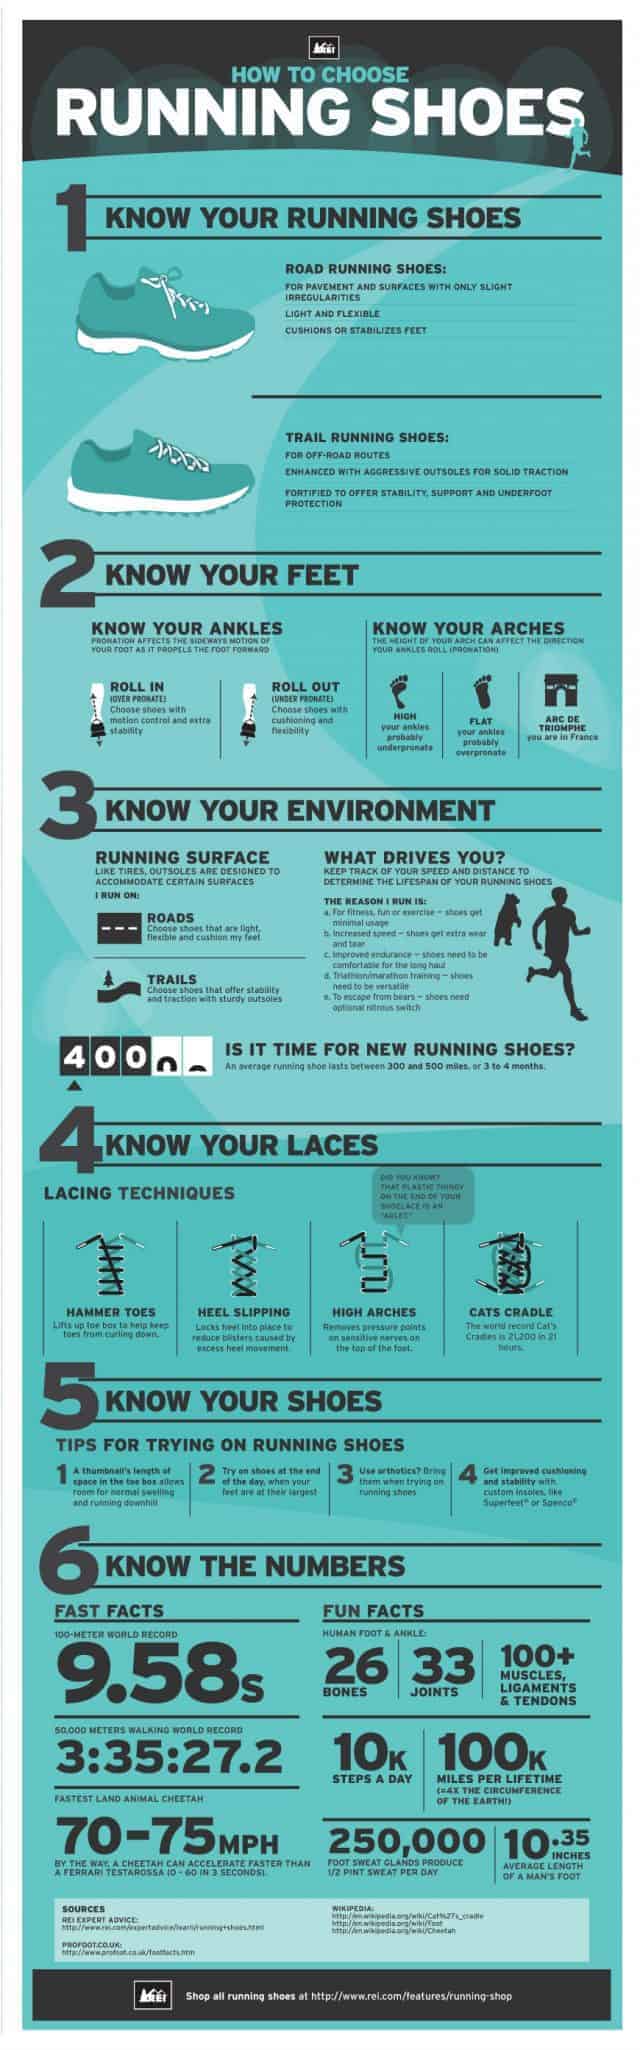 How To Choose Running Shoes